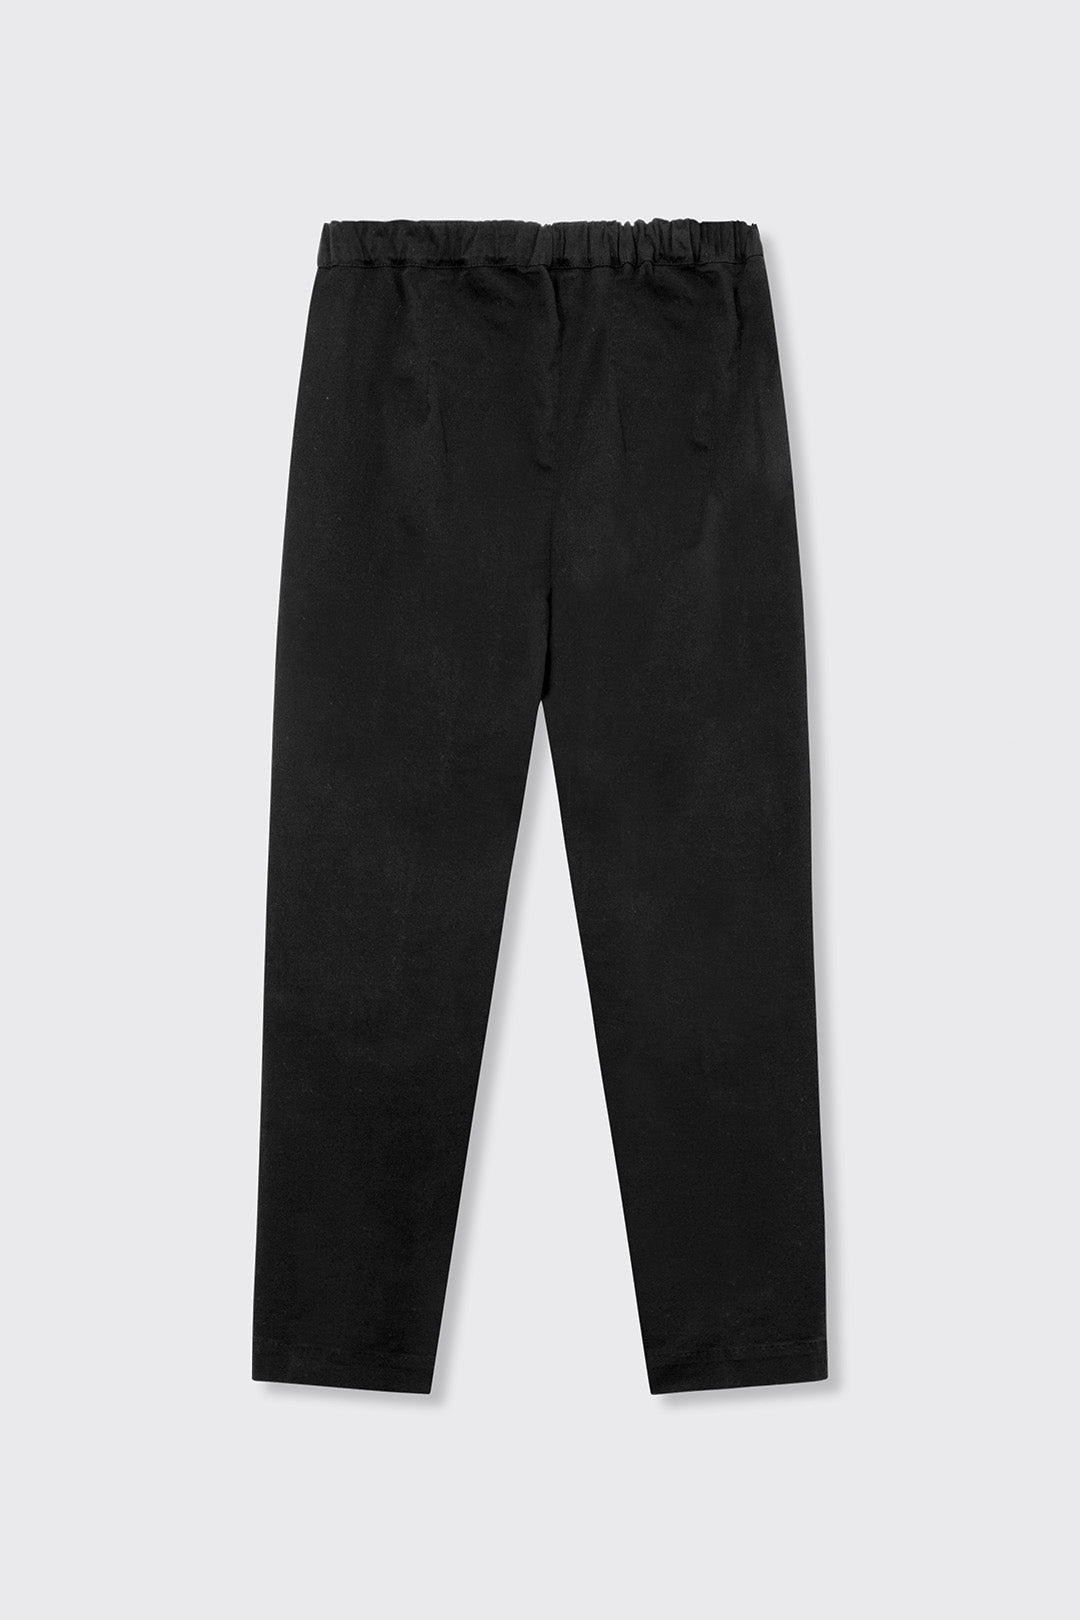 SHAY PULL-ON PANT IN GARMENT WASHED COTTON - Jarbo